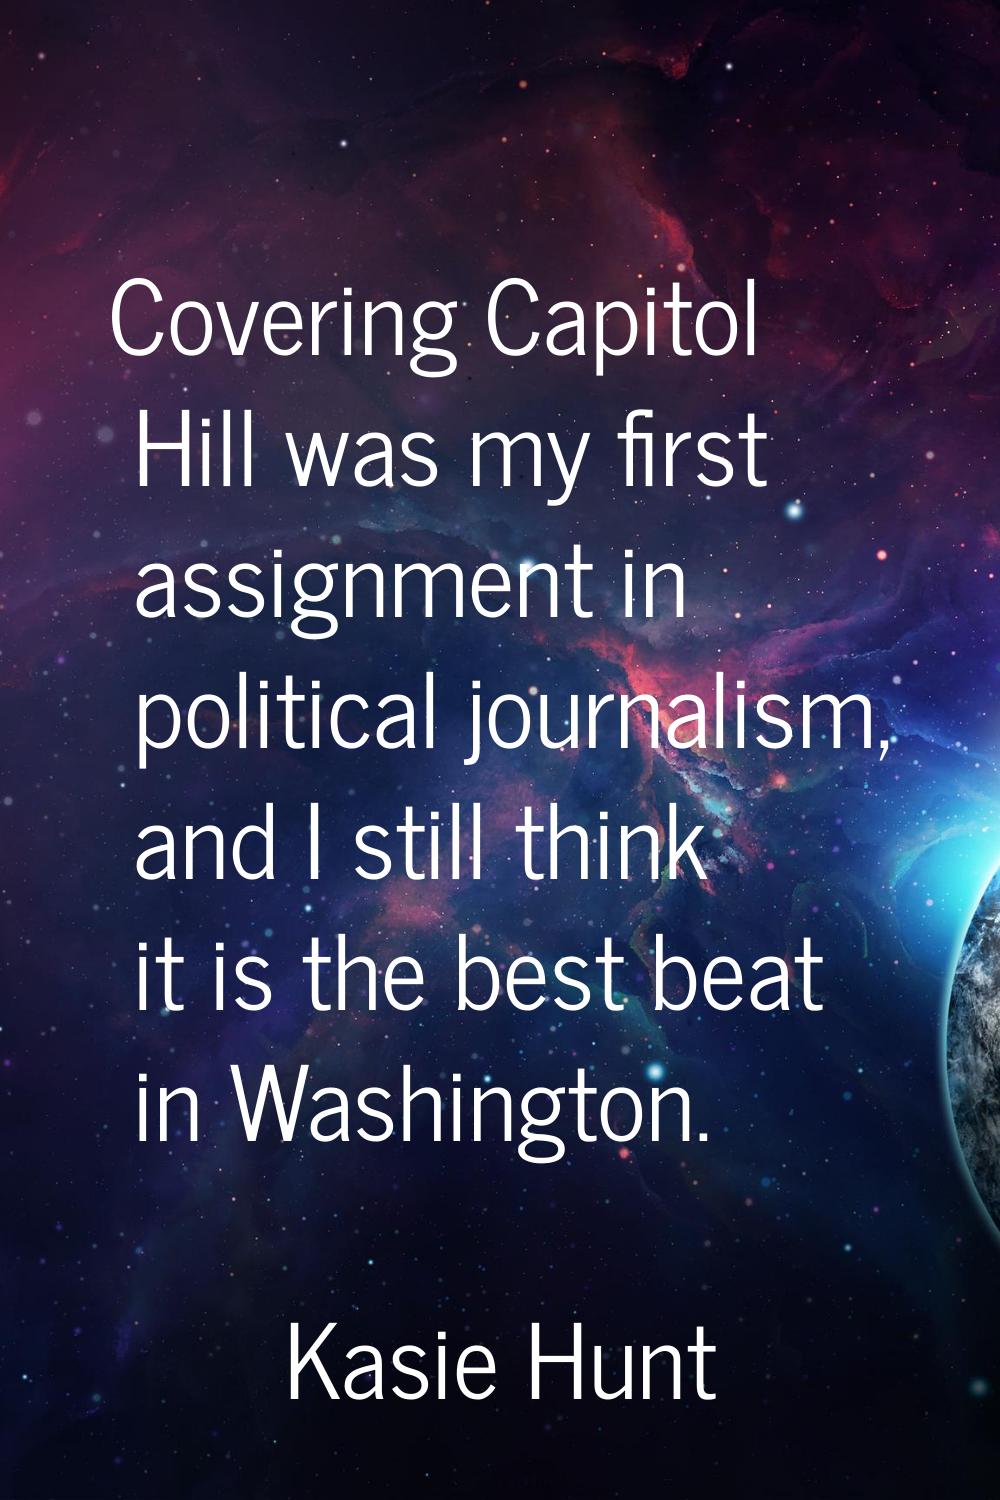 Covering Capitol Hill was my first assignment in political journalism, and I still think it is the 